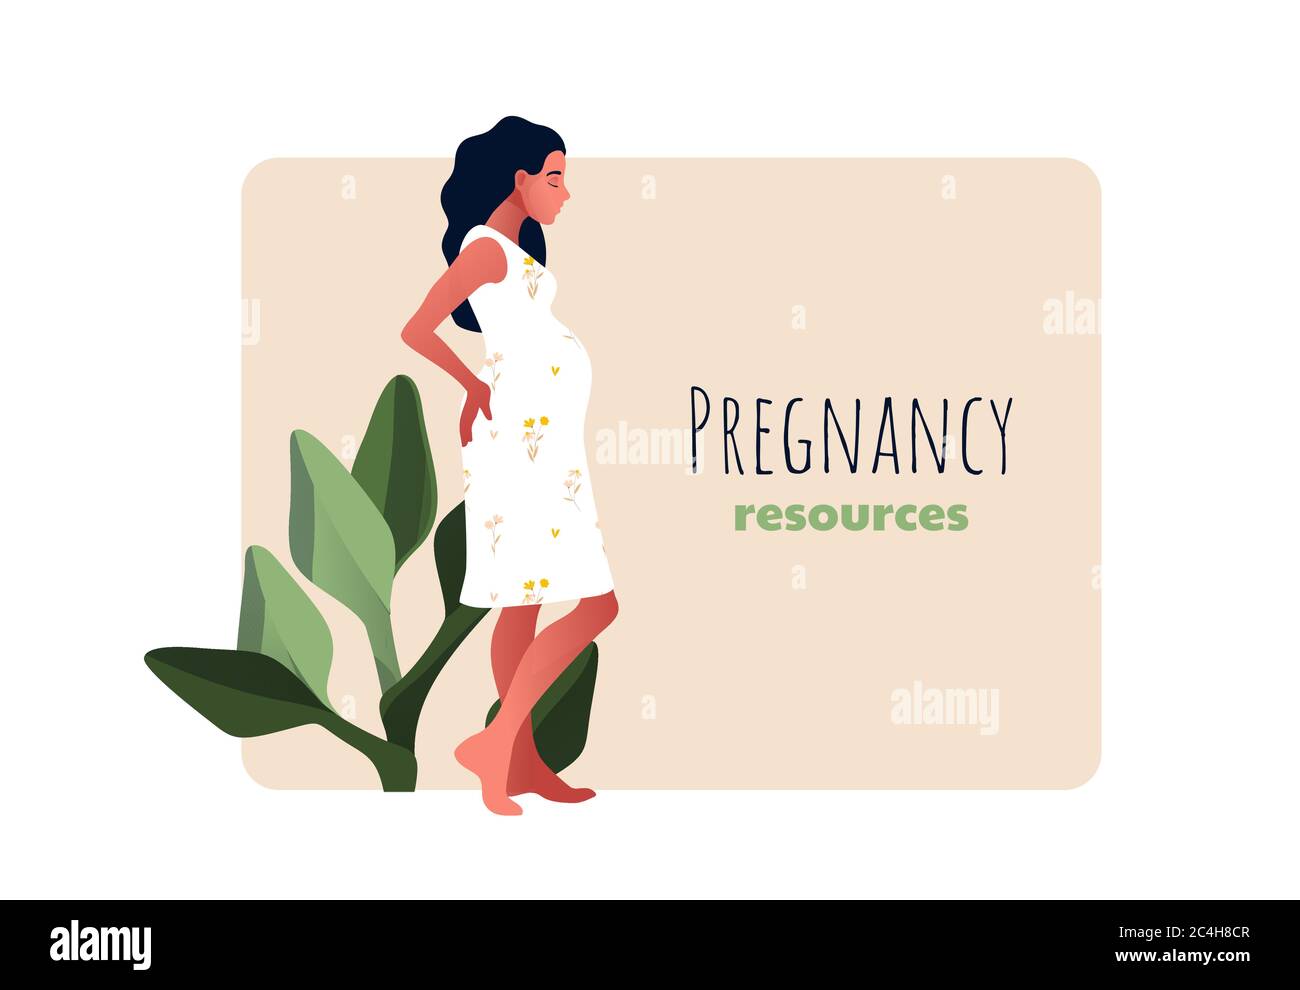 Pregnancy resources type. Sad and pregnant girl.  Stock Vector